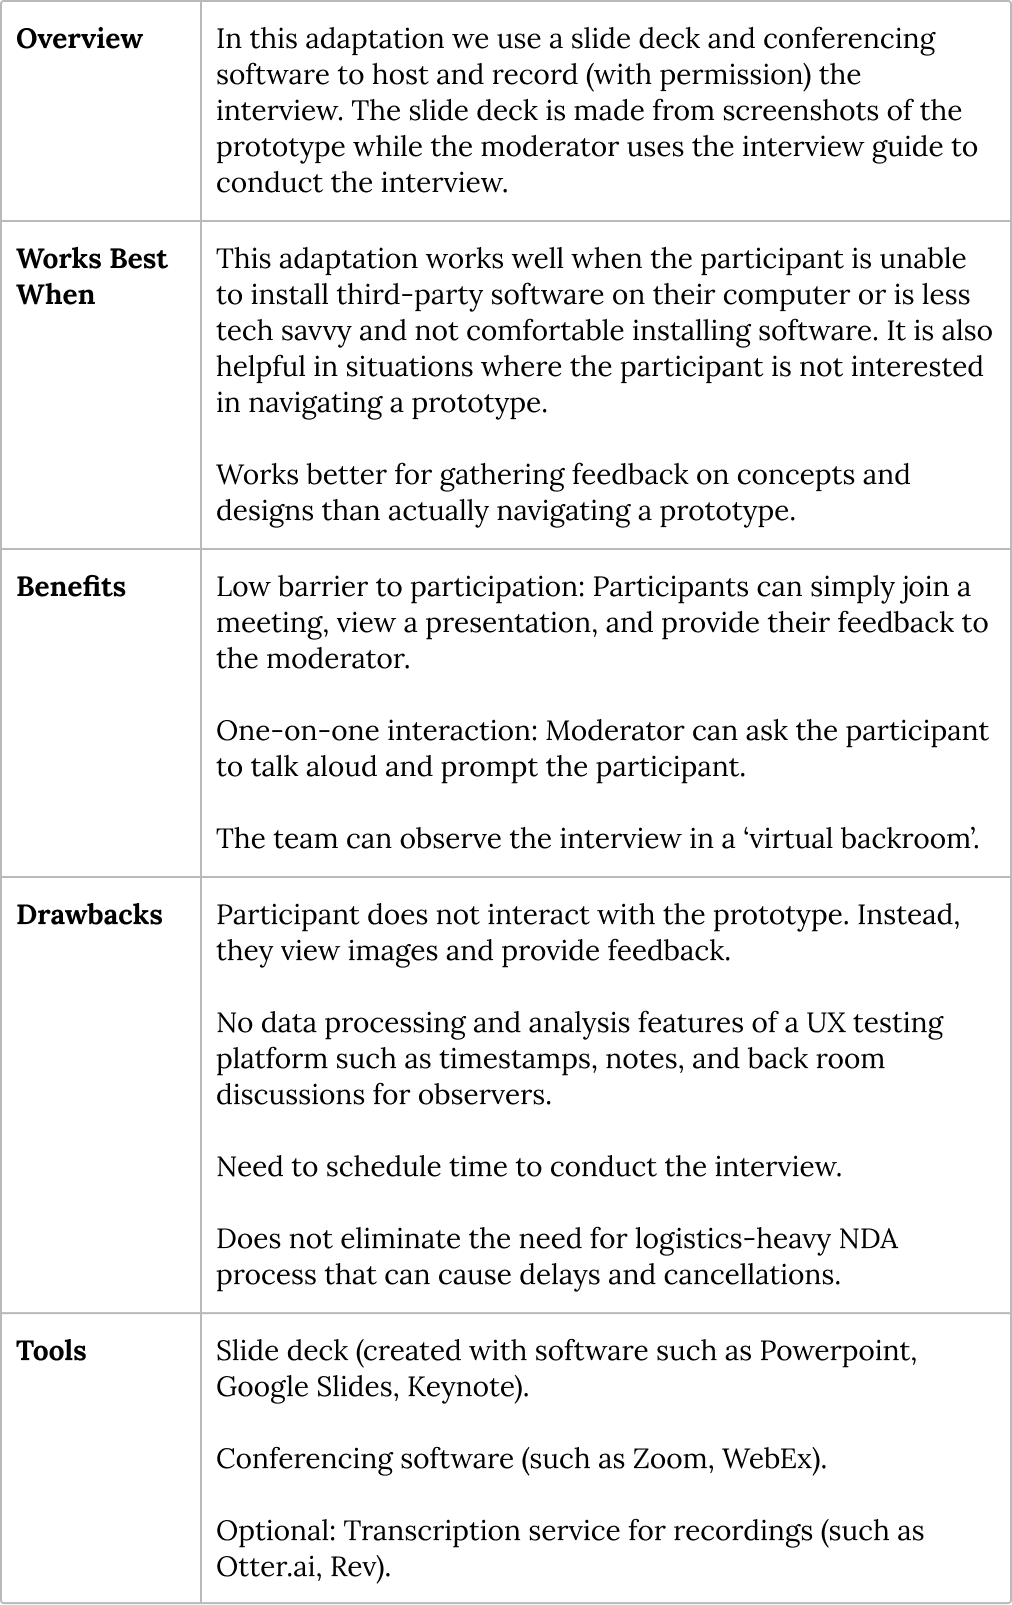 A table with overview of user interviews with screenshots method. When it works best, benefits, drawbacks, and tools needed.